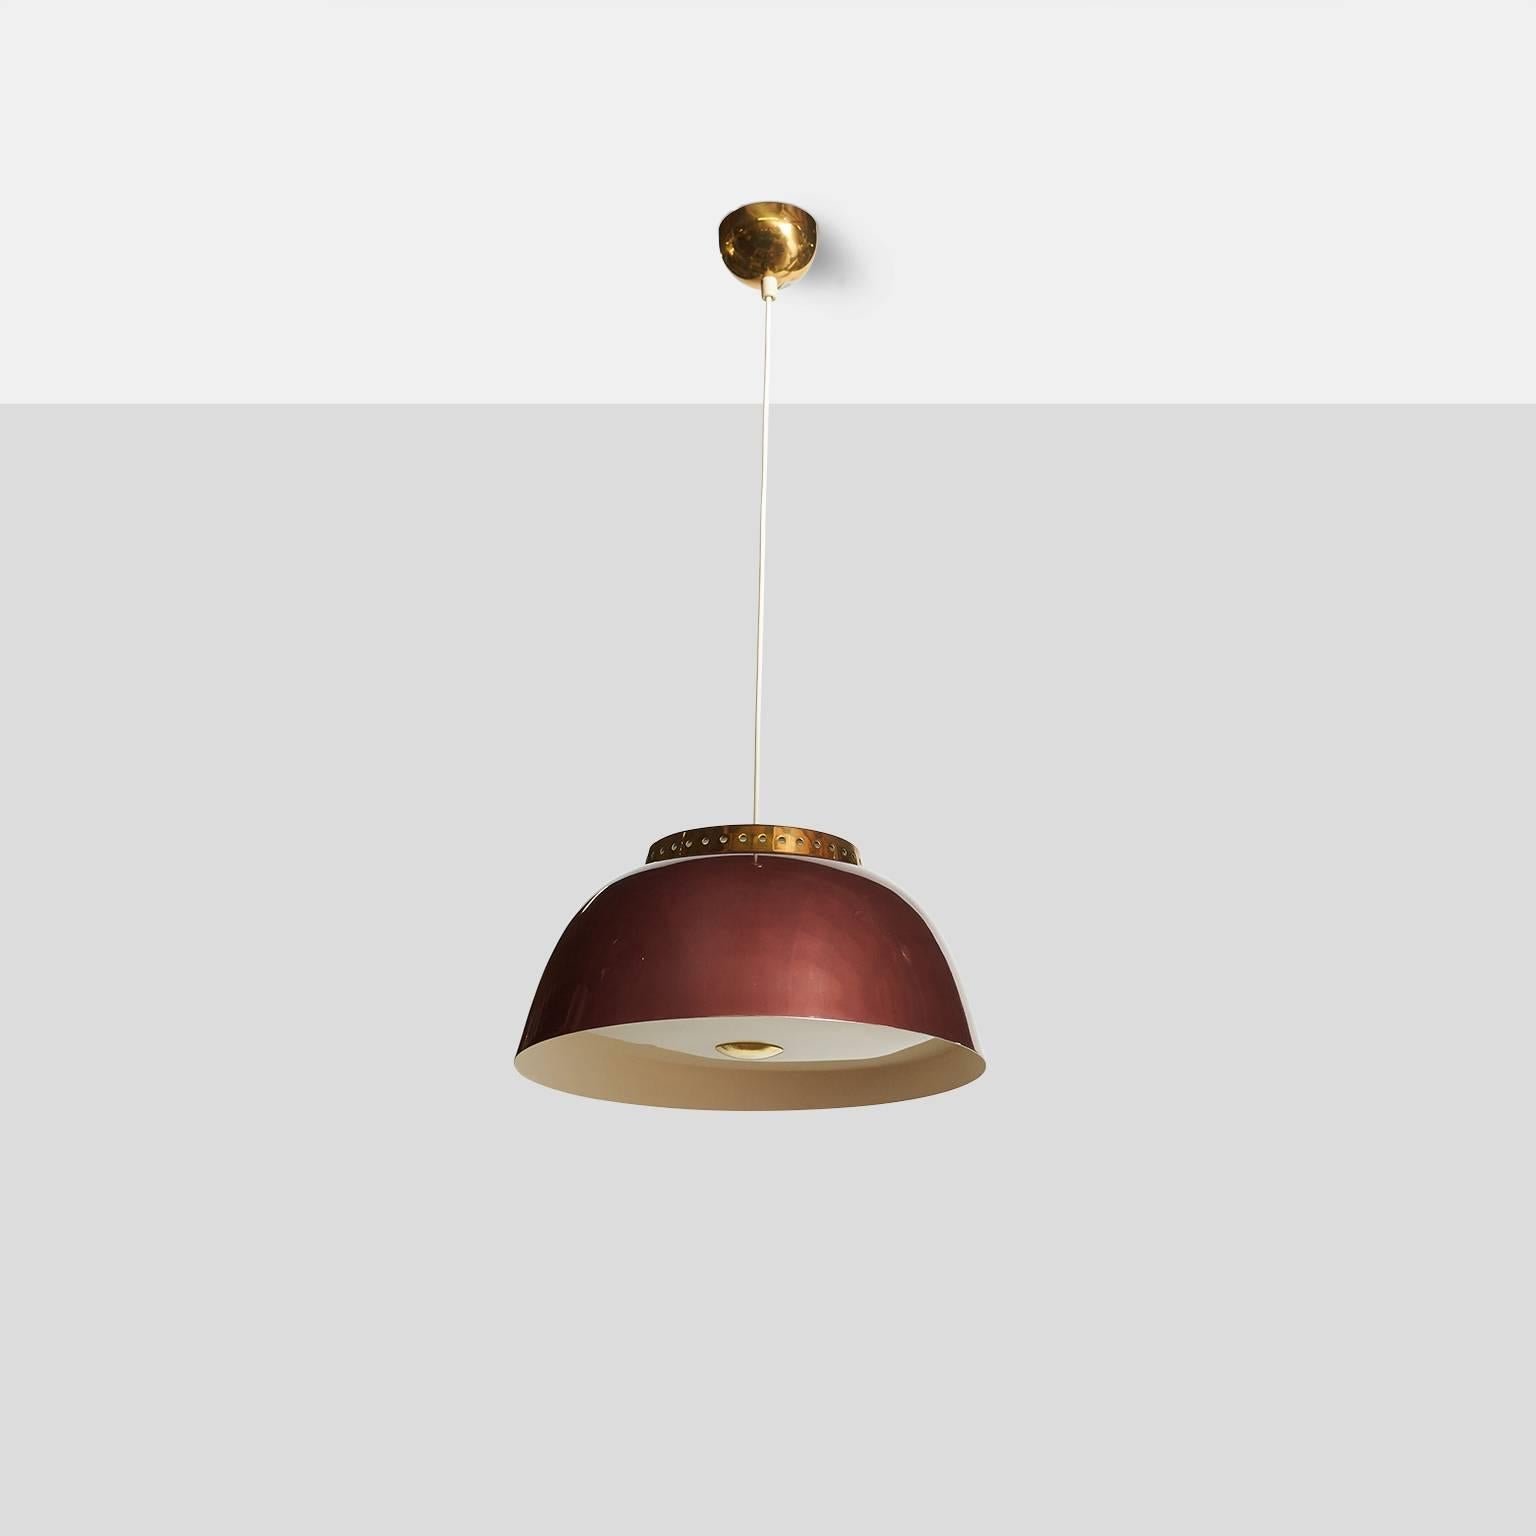 A Lisa Johansson-Pape chandelier model #61-334. Chandelier has pearlescent burgundy metal shade with a perforated brass cap, Opaline glass diffuser on top, and a plexiglass diffuser underneath with brass finial. Marked Orno. Overall length can be